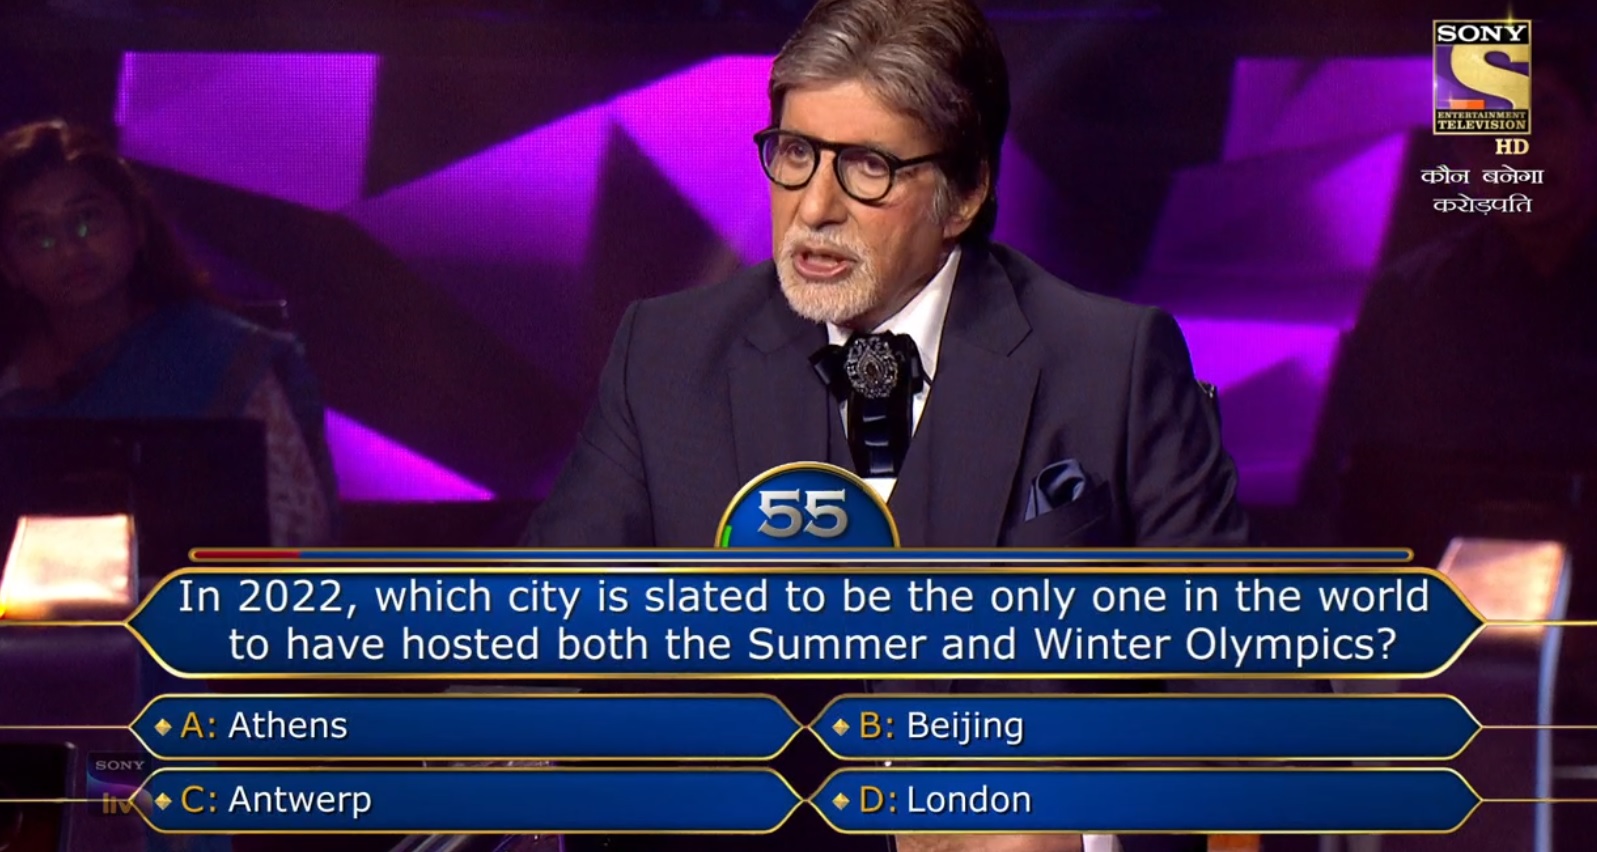 Ques : In 2022, which city is slated to be the only one in the world to have hosted both the Summer and Winter Olympics?